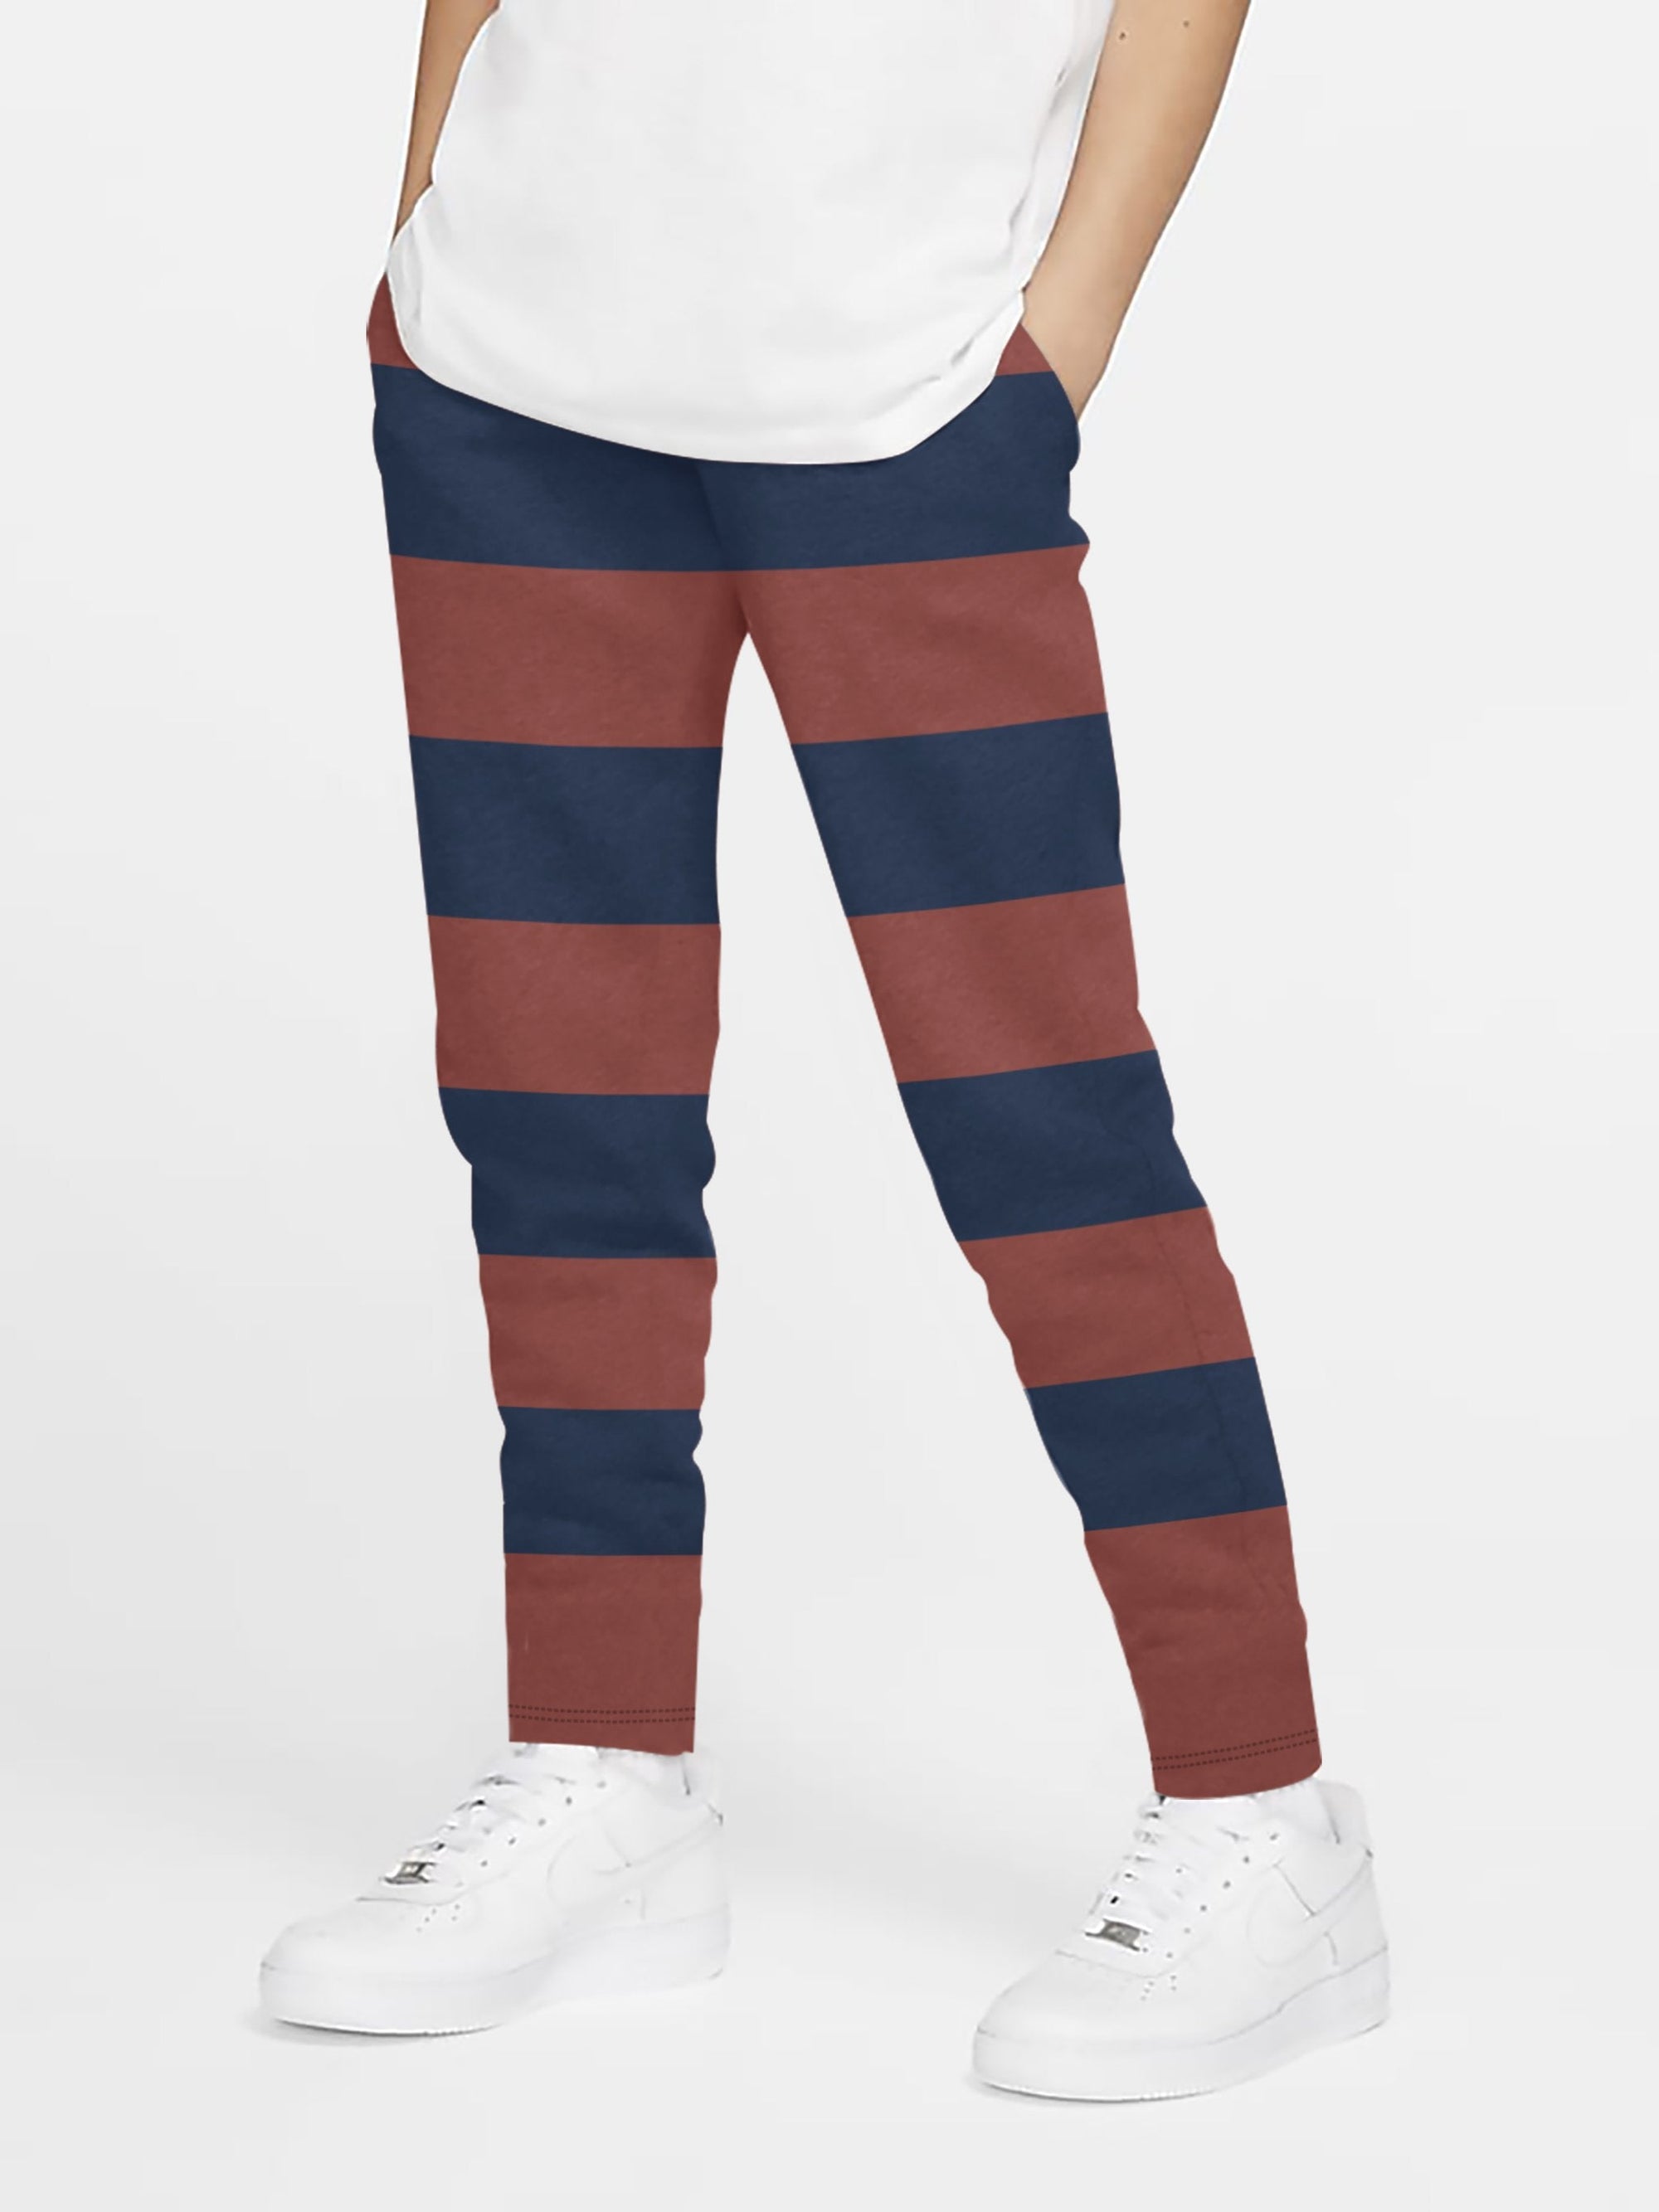 Next Slim Fit Single Jersey Jogger Trouser For Kids-Maroon & Navy Stripes-SP5023